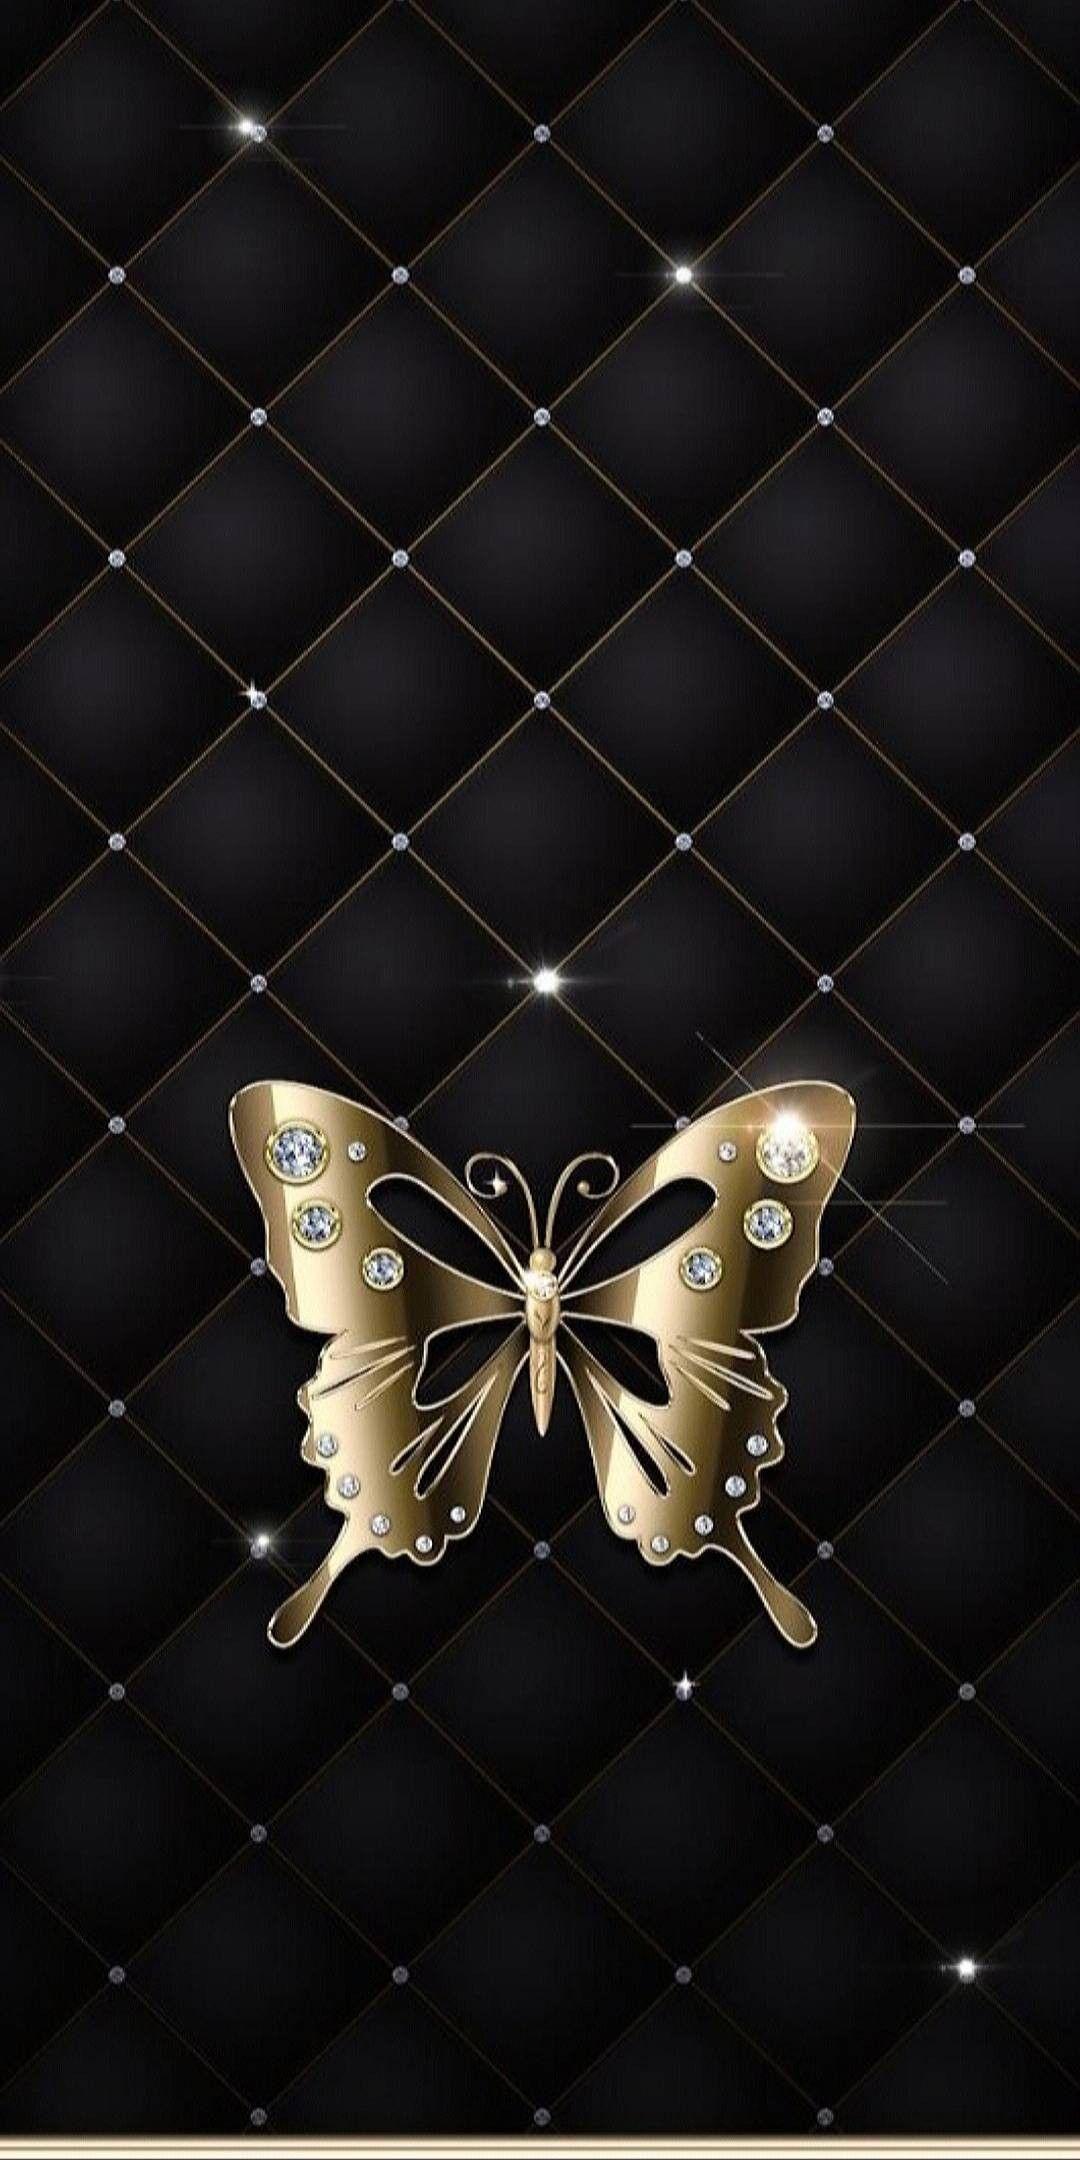 Bling Butterfly Wallpapers - Top Free Bling Butterfly Backgrounds ...